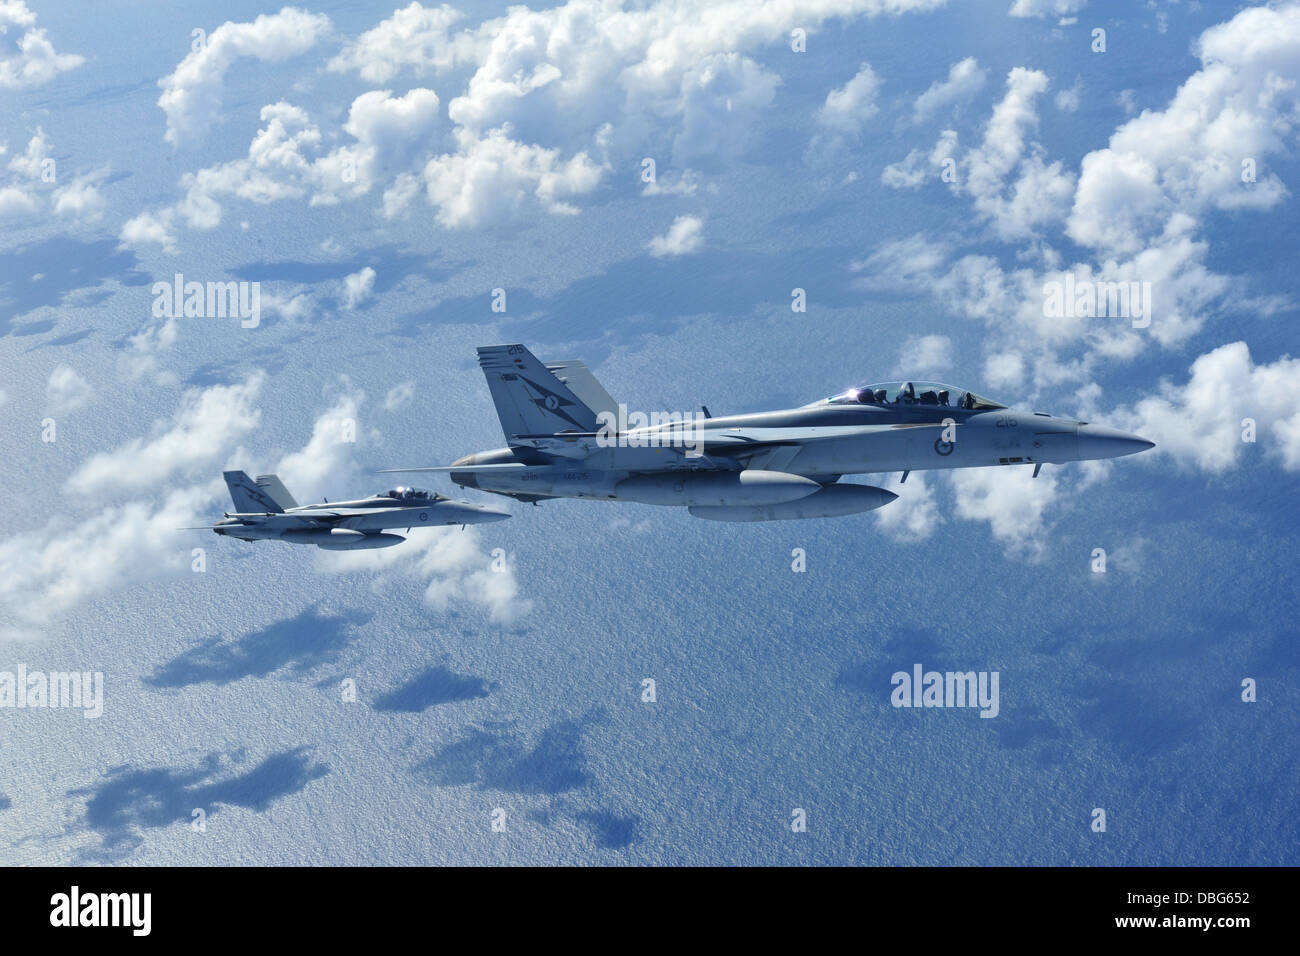 Two Royal Australian Air Force F-18 Super Hornets prepare to refuel off the coast of Queensland, Australia, July 26, 2013. The refueling mission was part of Talisman Saber 2013, an exercise that provides realistic, relevant training necessary to maintain Stock Photo